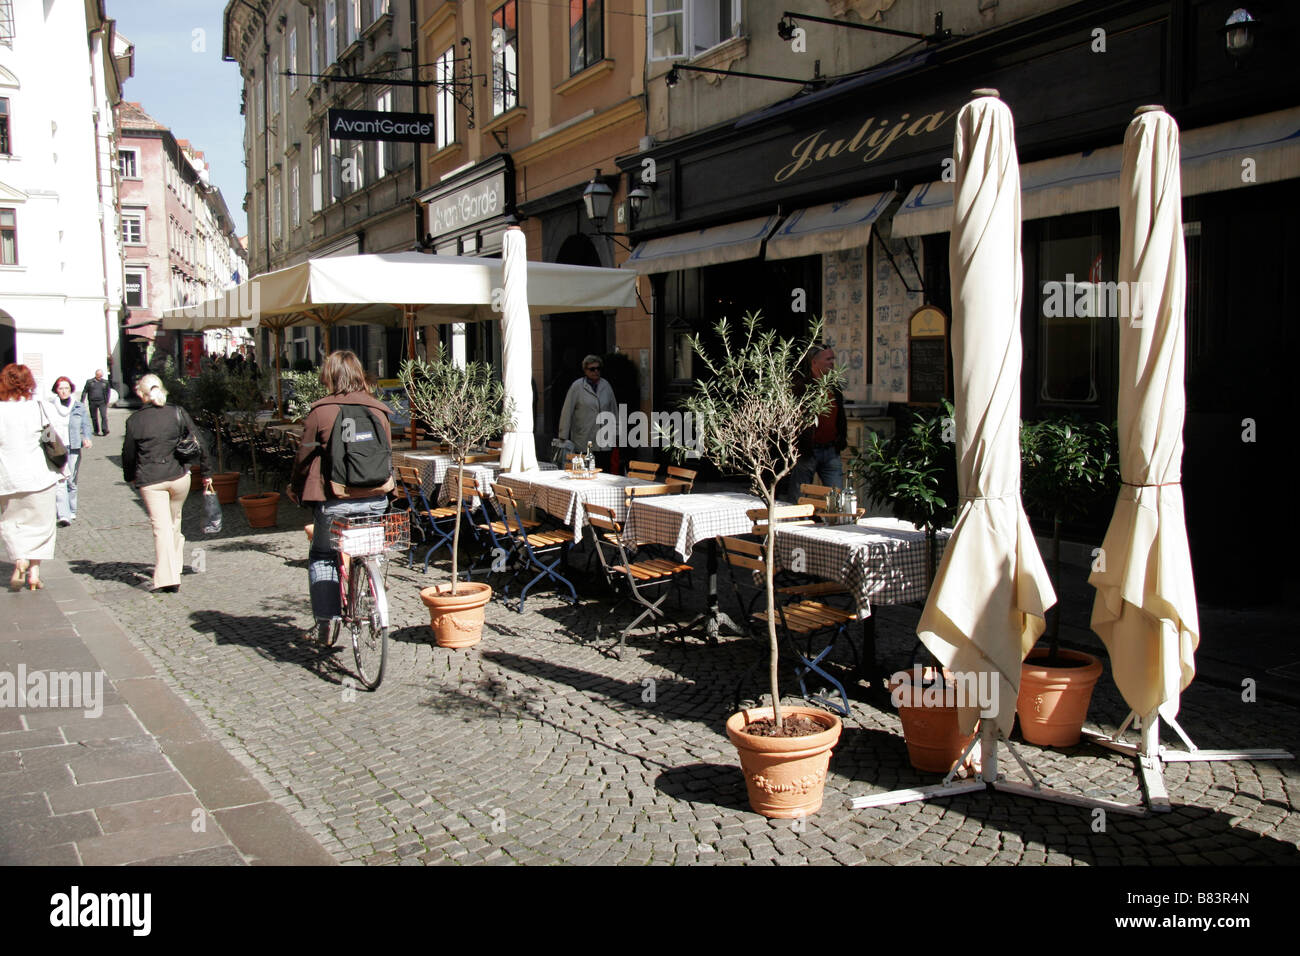 Al-fresco cafes, bars and restaurants line the narrow streets of the Old Town in Ljubljana, the capital city of Slovenia Stock Photo